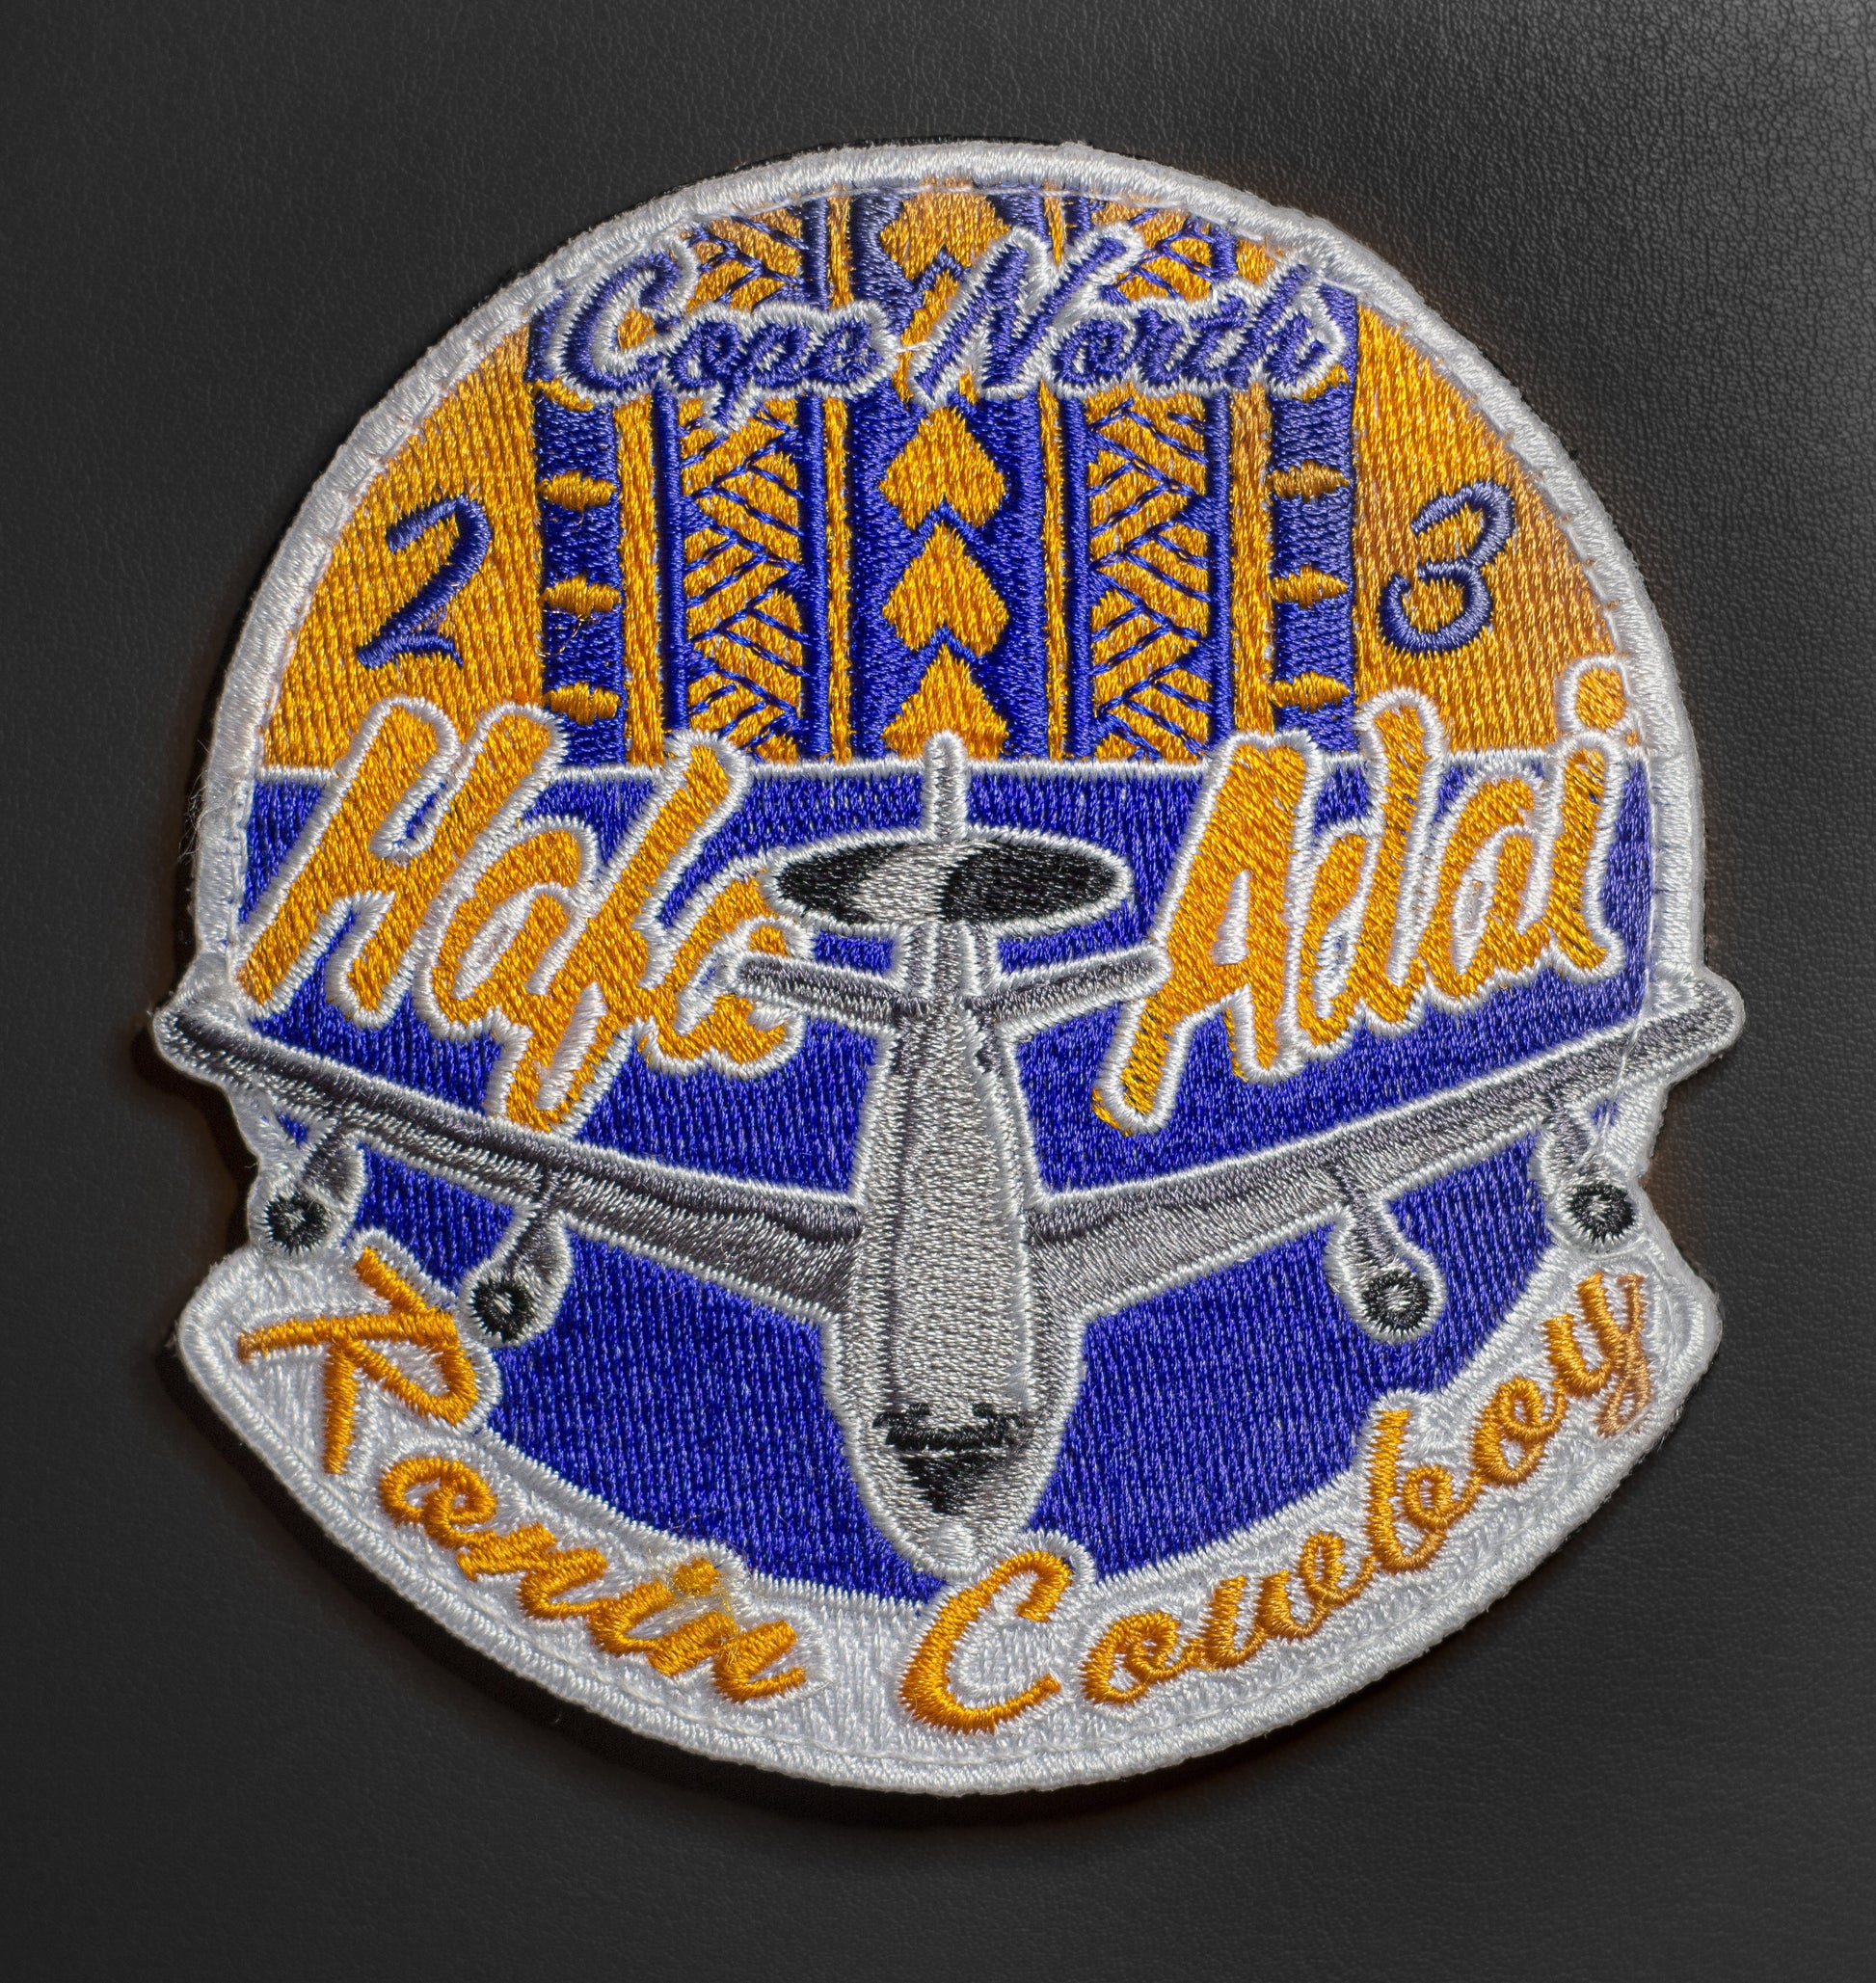 961St Aacs Cope North 23 Patch